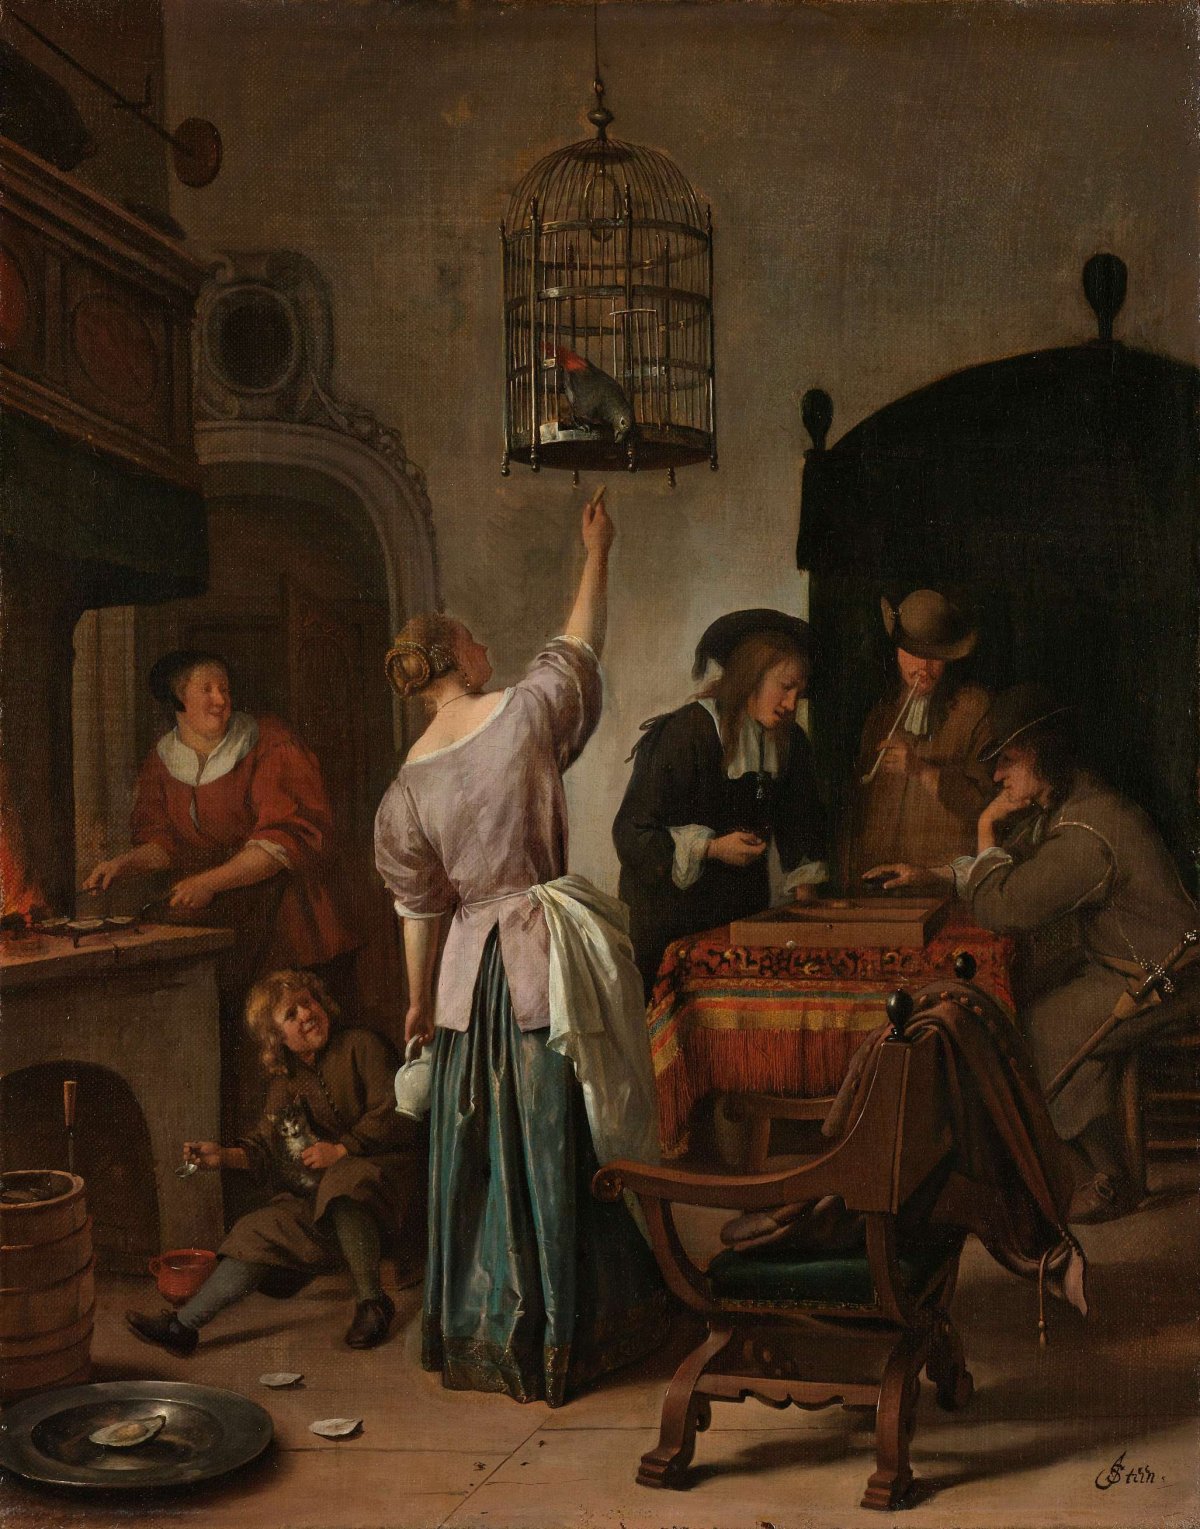 Interior with a Woman Feeding a Parrot, Known as ‘The Parrot Cage’, Jan Havicksz. Steen, c. 1660 - c. 1670